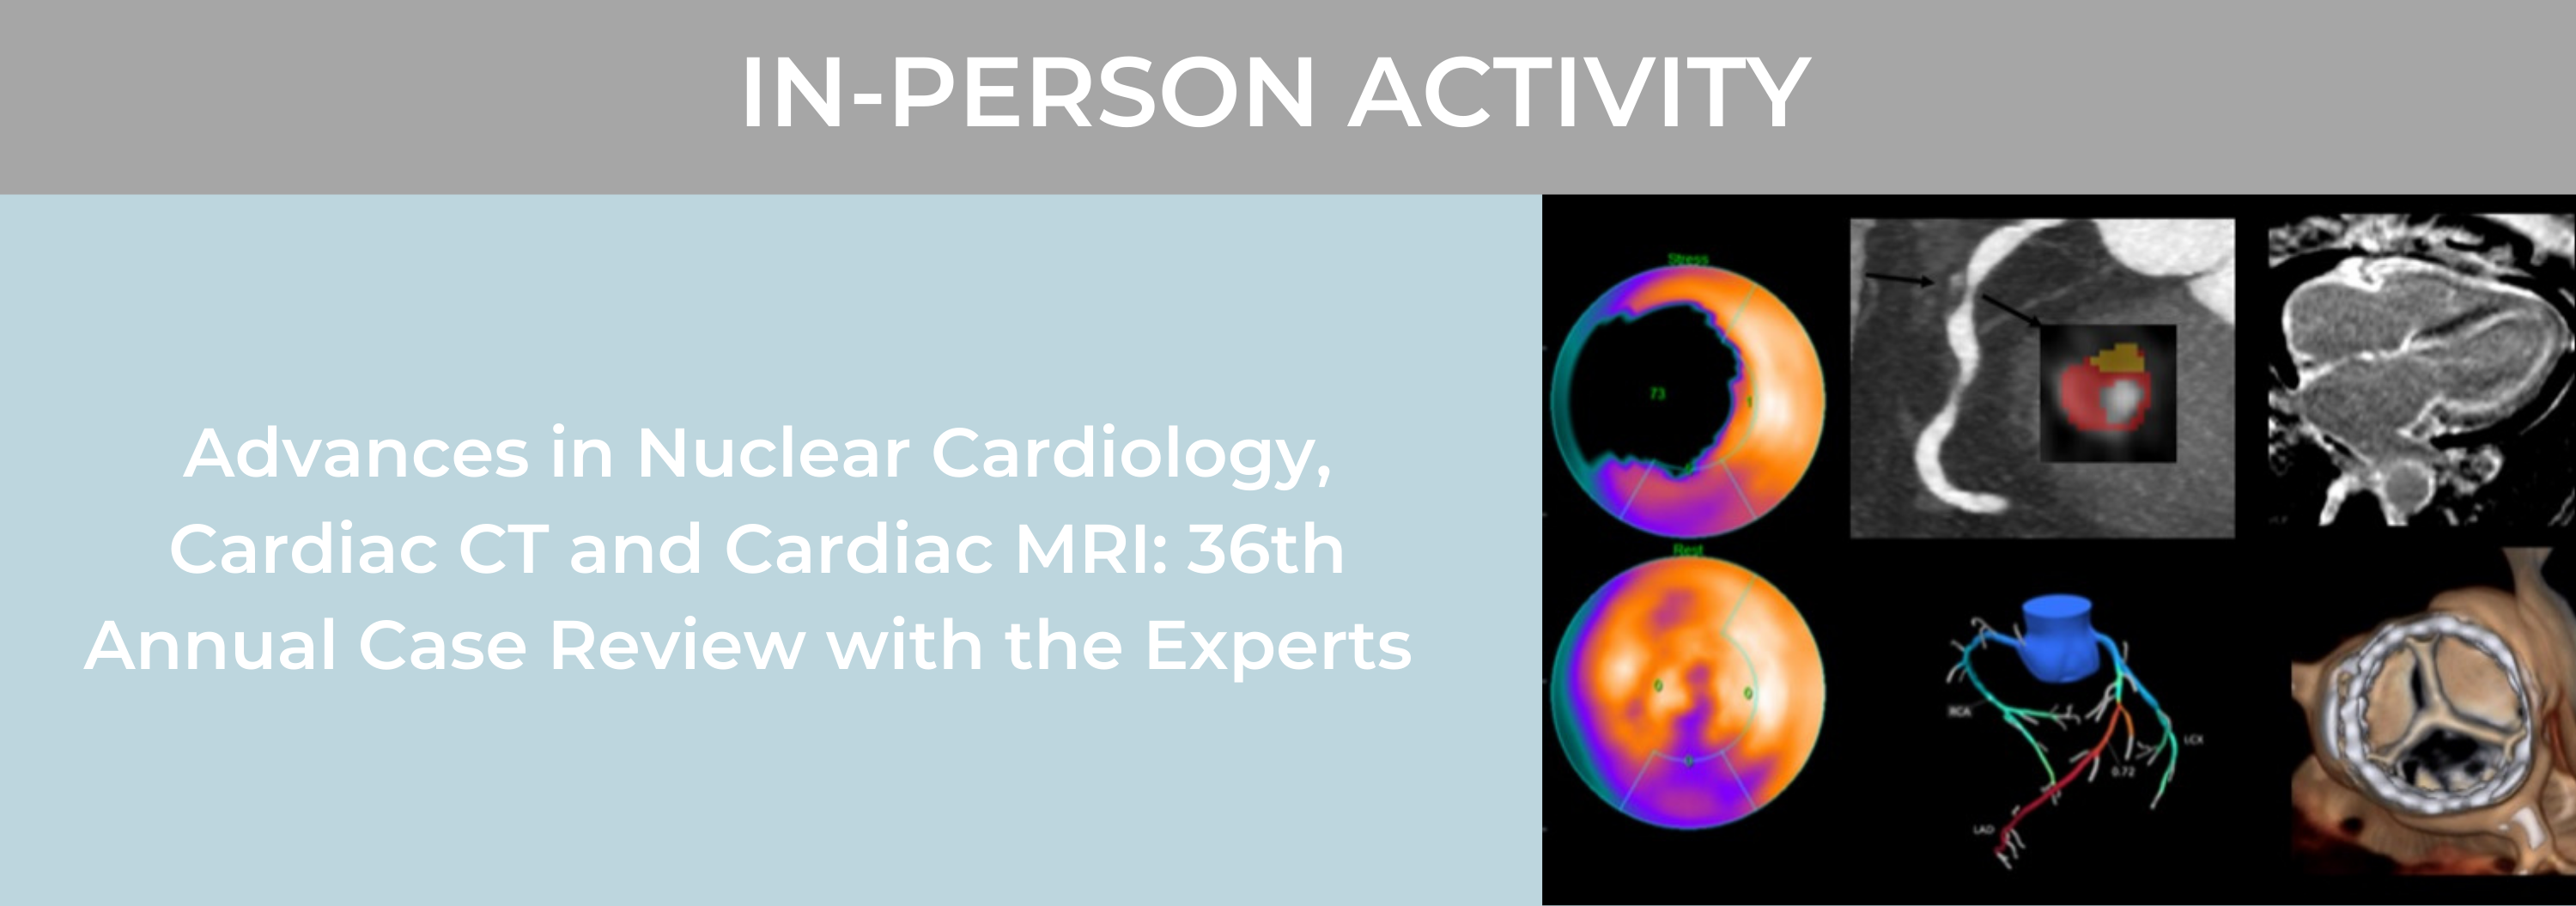 POSTPONED-Advances in Nuclear Cardiology, Cardiac CT and Cardiac MRI: 36th Annual Case Review with the Experts Banner